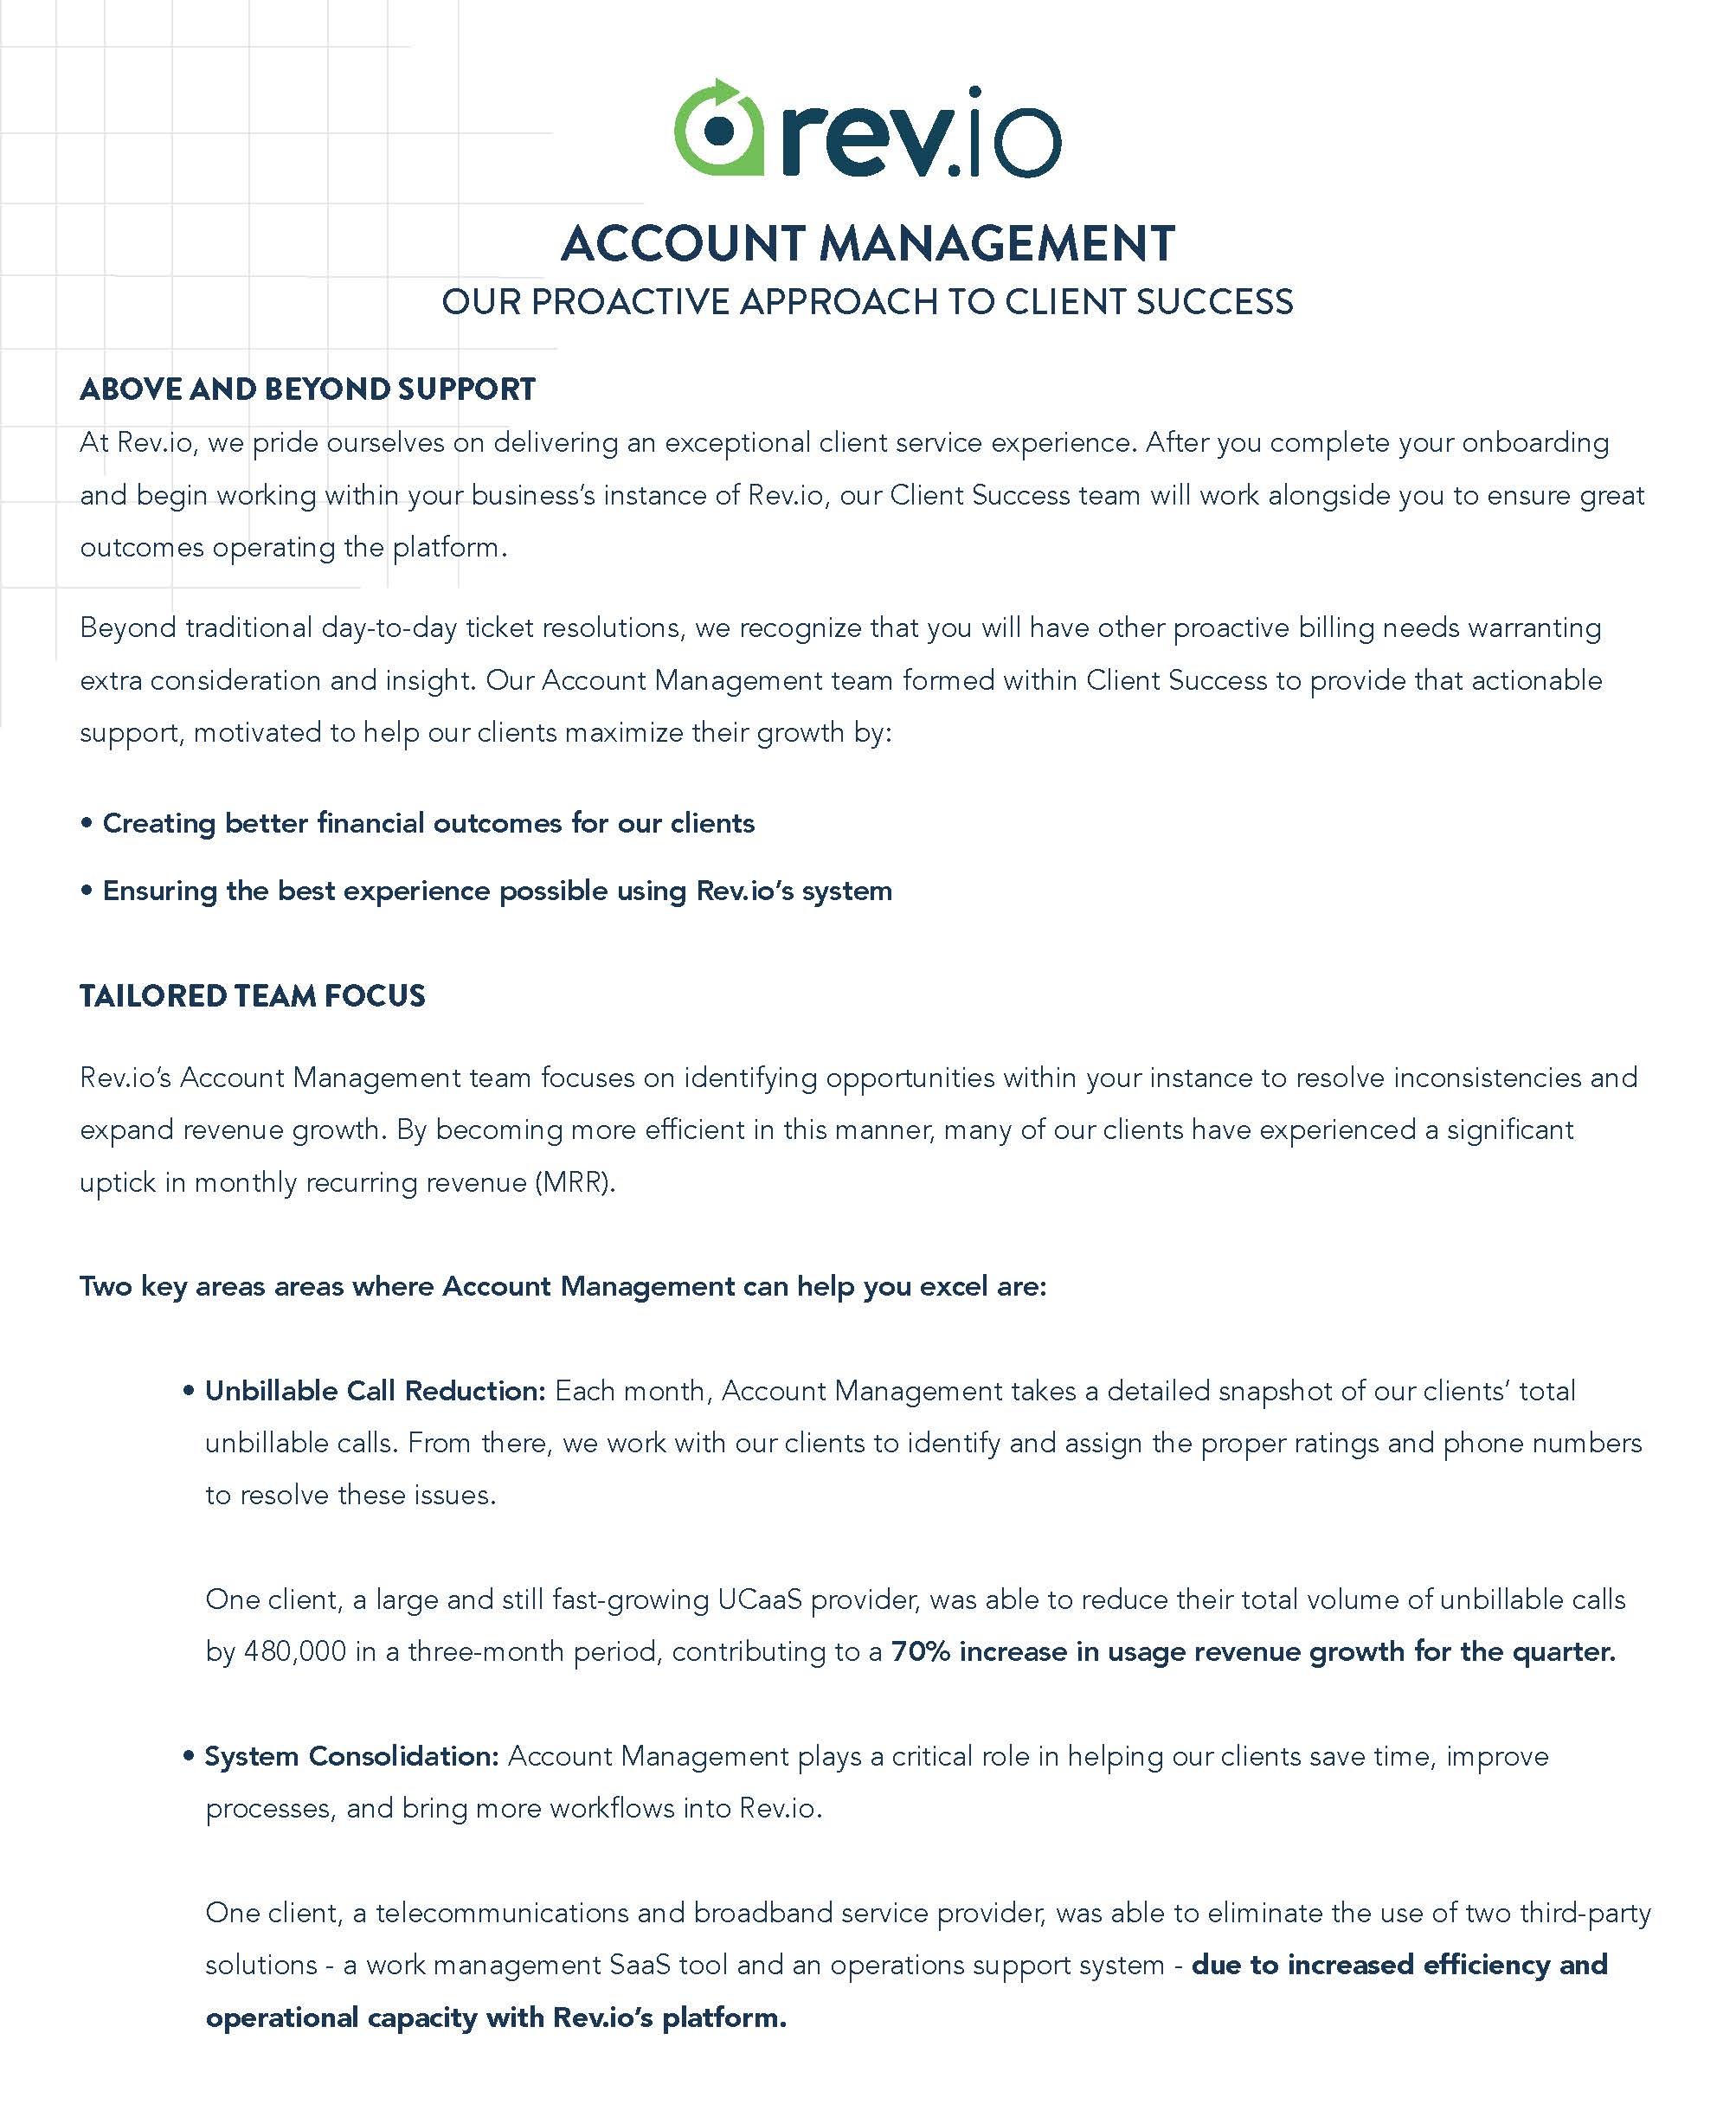 Account Management20230503_Page_1